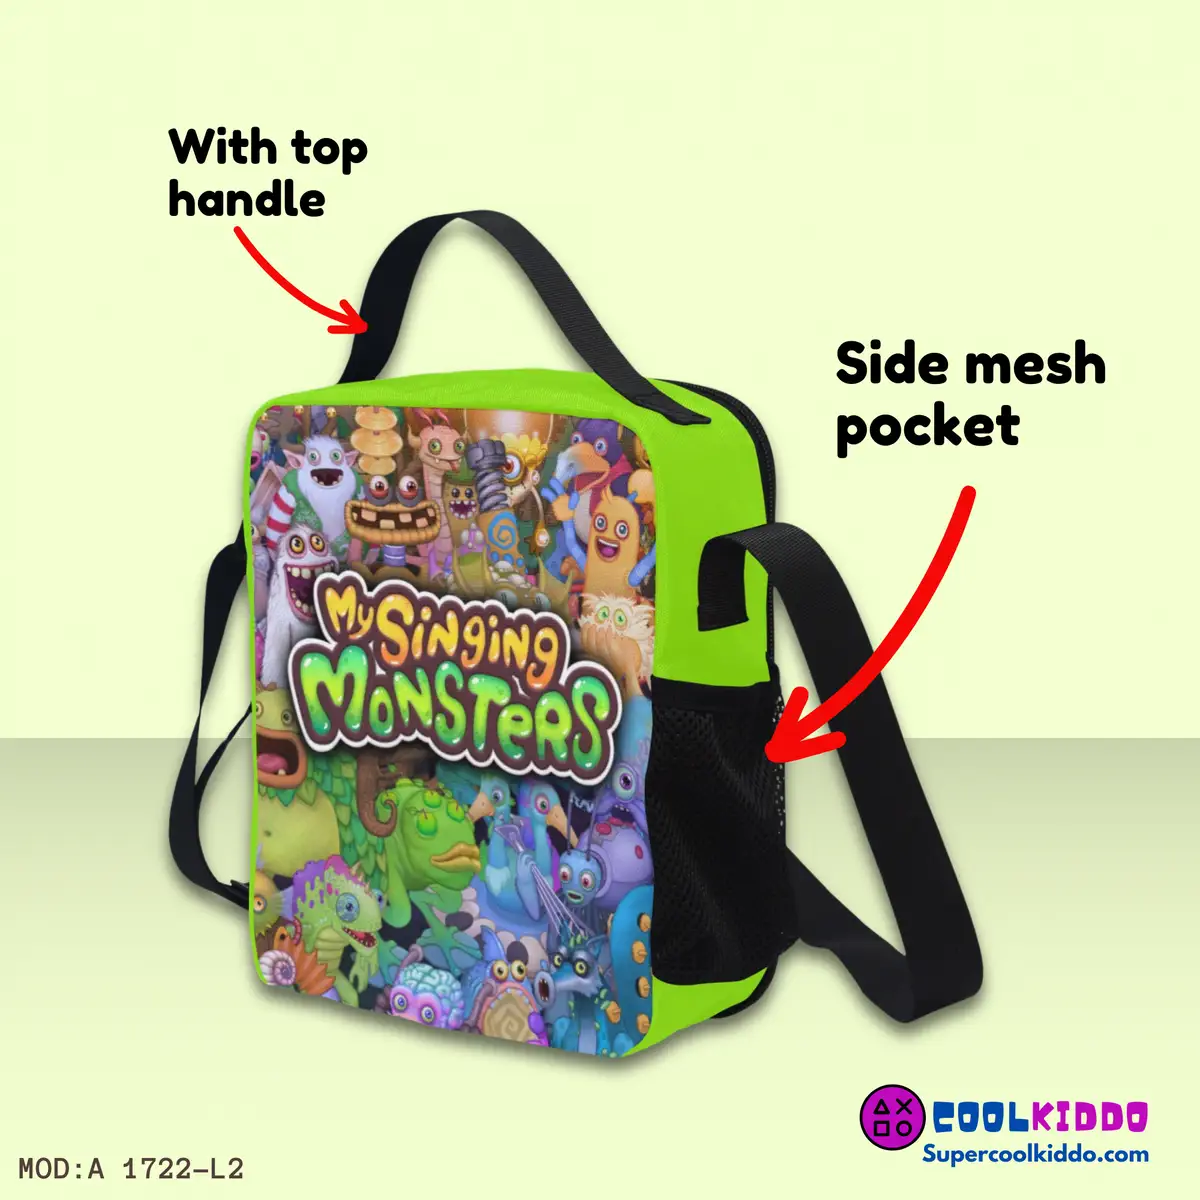 My Singing Monsters Insulated Lunch Bag, Personalized, Nylon Construction, Easy to Clean, Kids Lunchbox Cool Kiddo 16